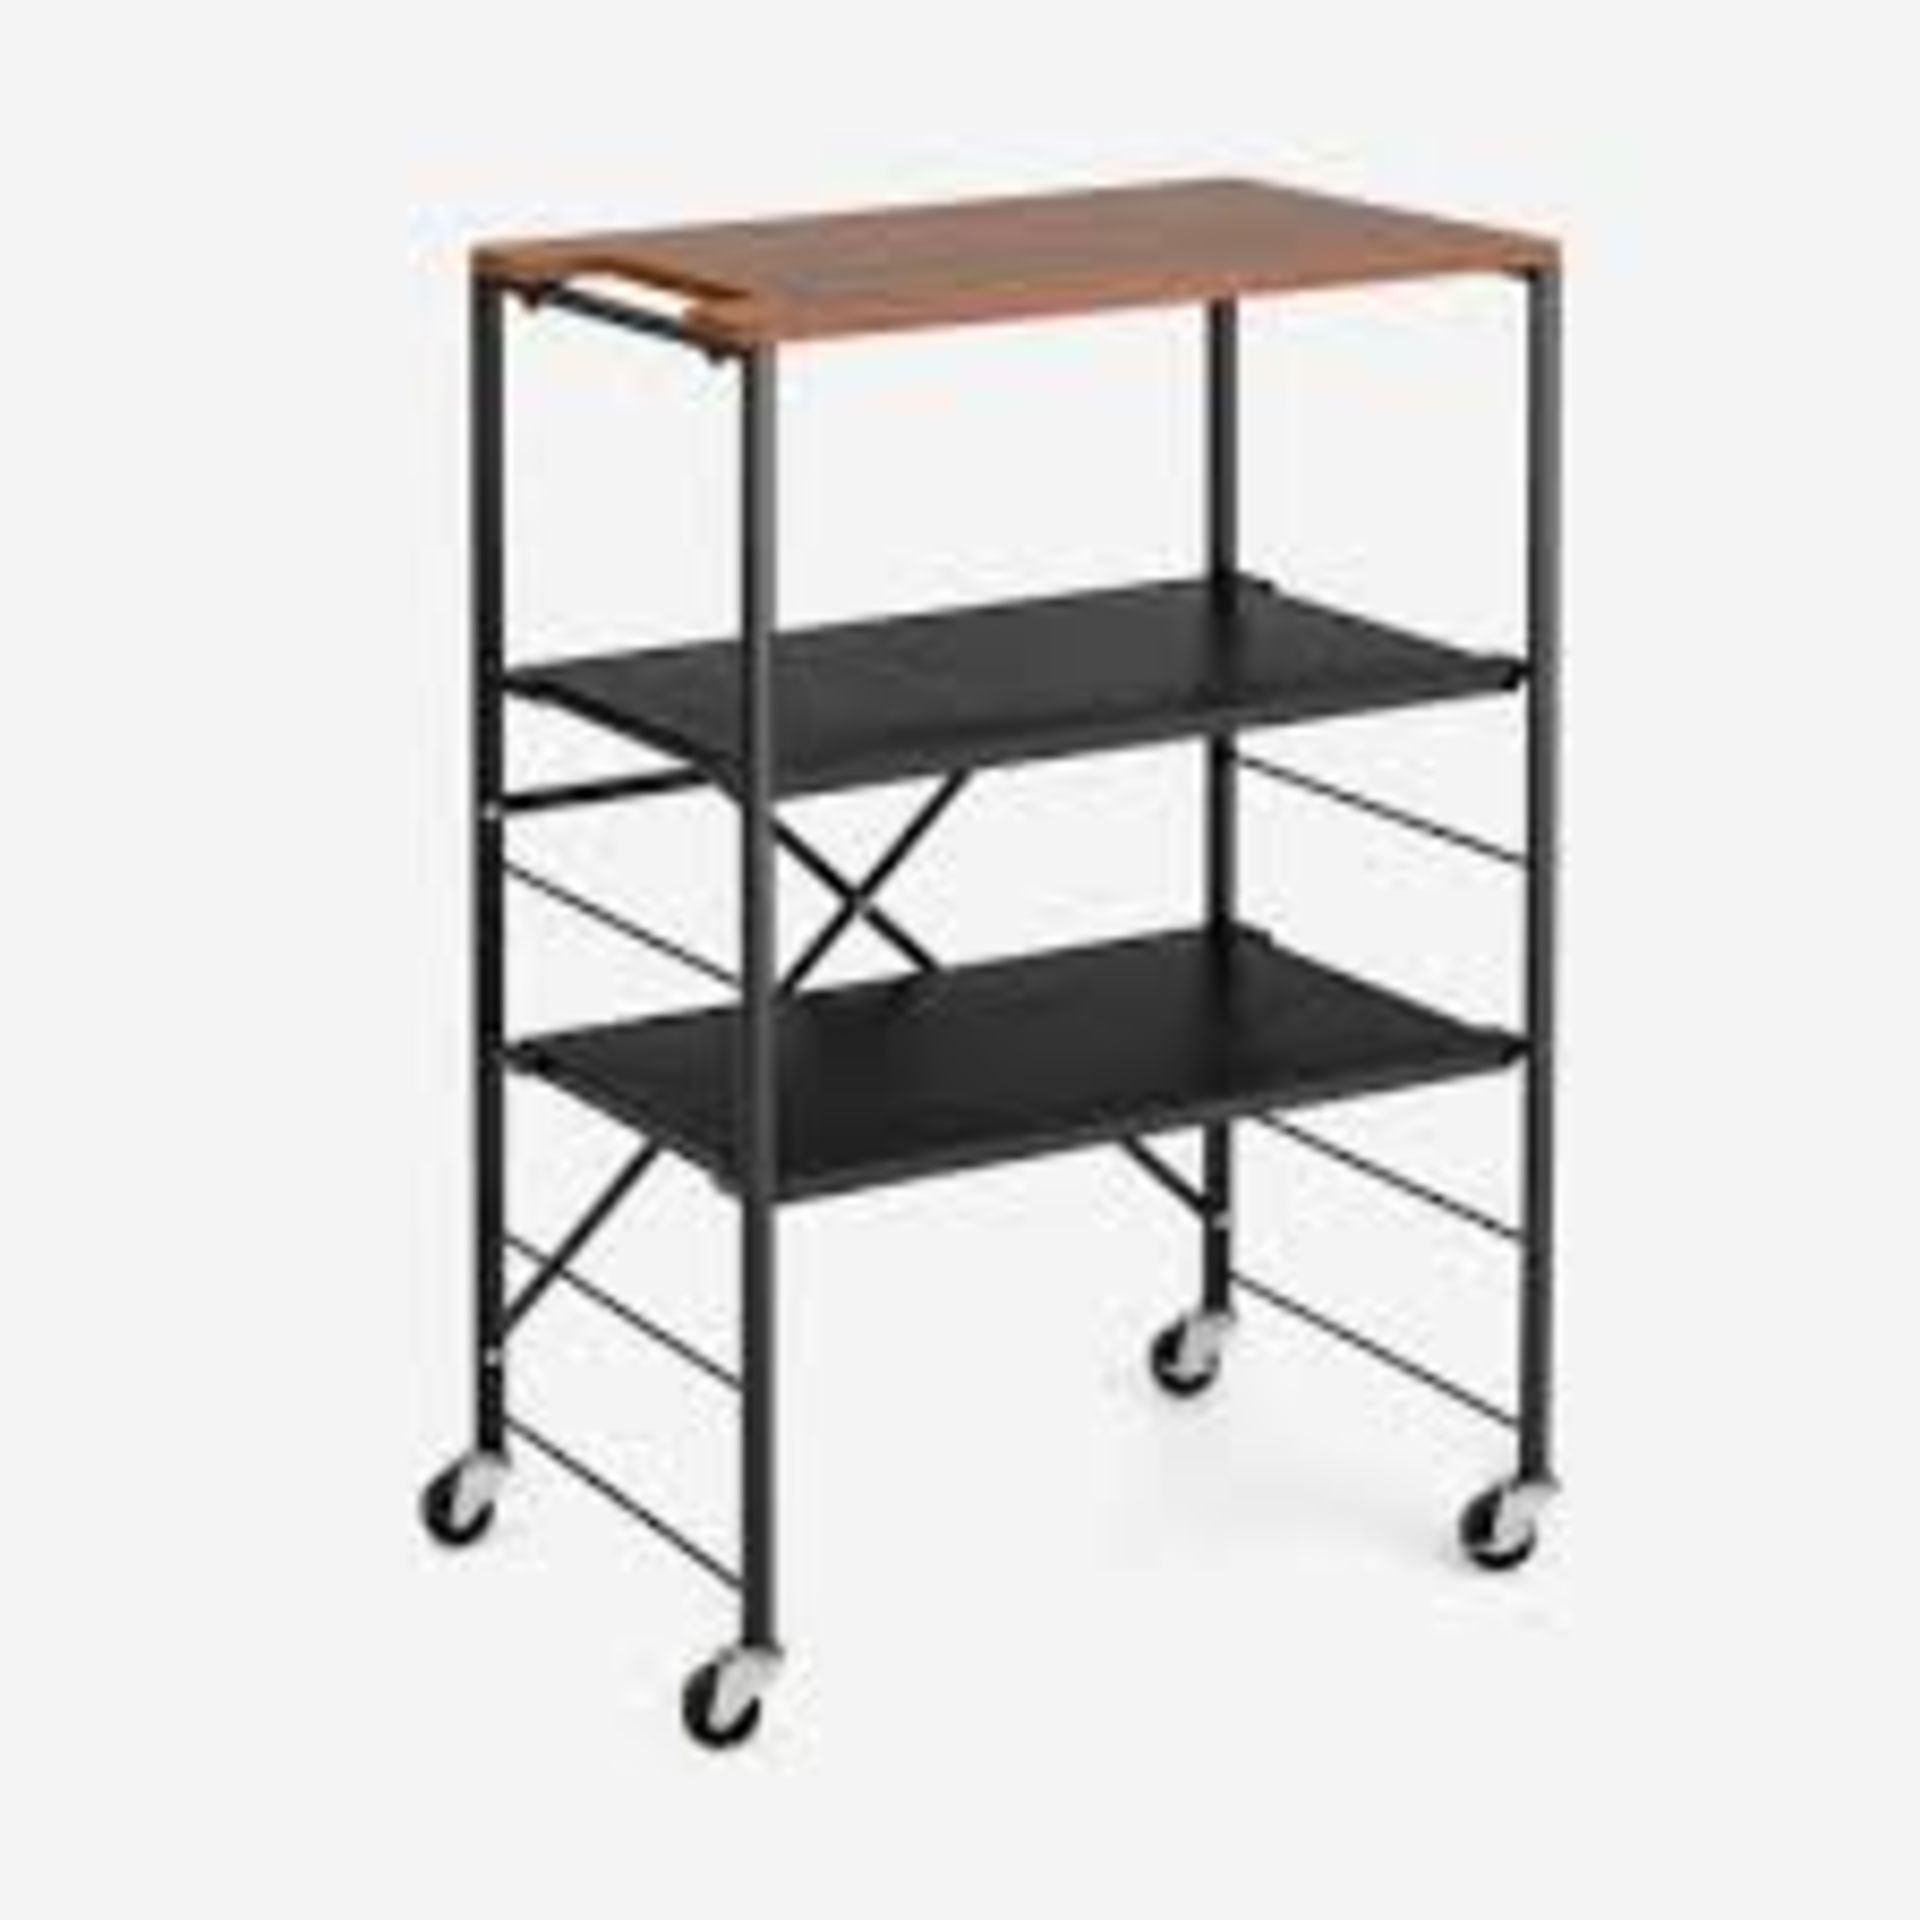 Storage Cart with Adjustable Shelves, Foldable Frame . - R14.15. Let this rolling storage rack be